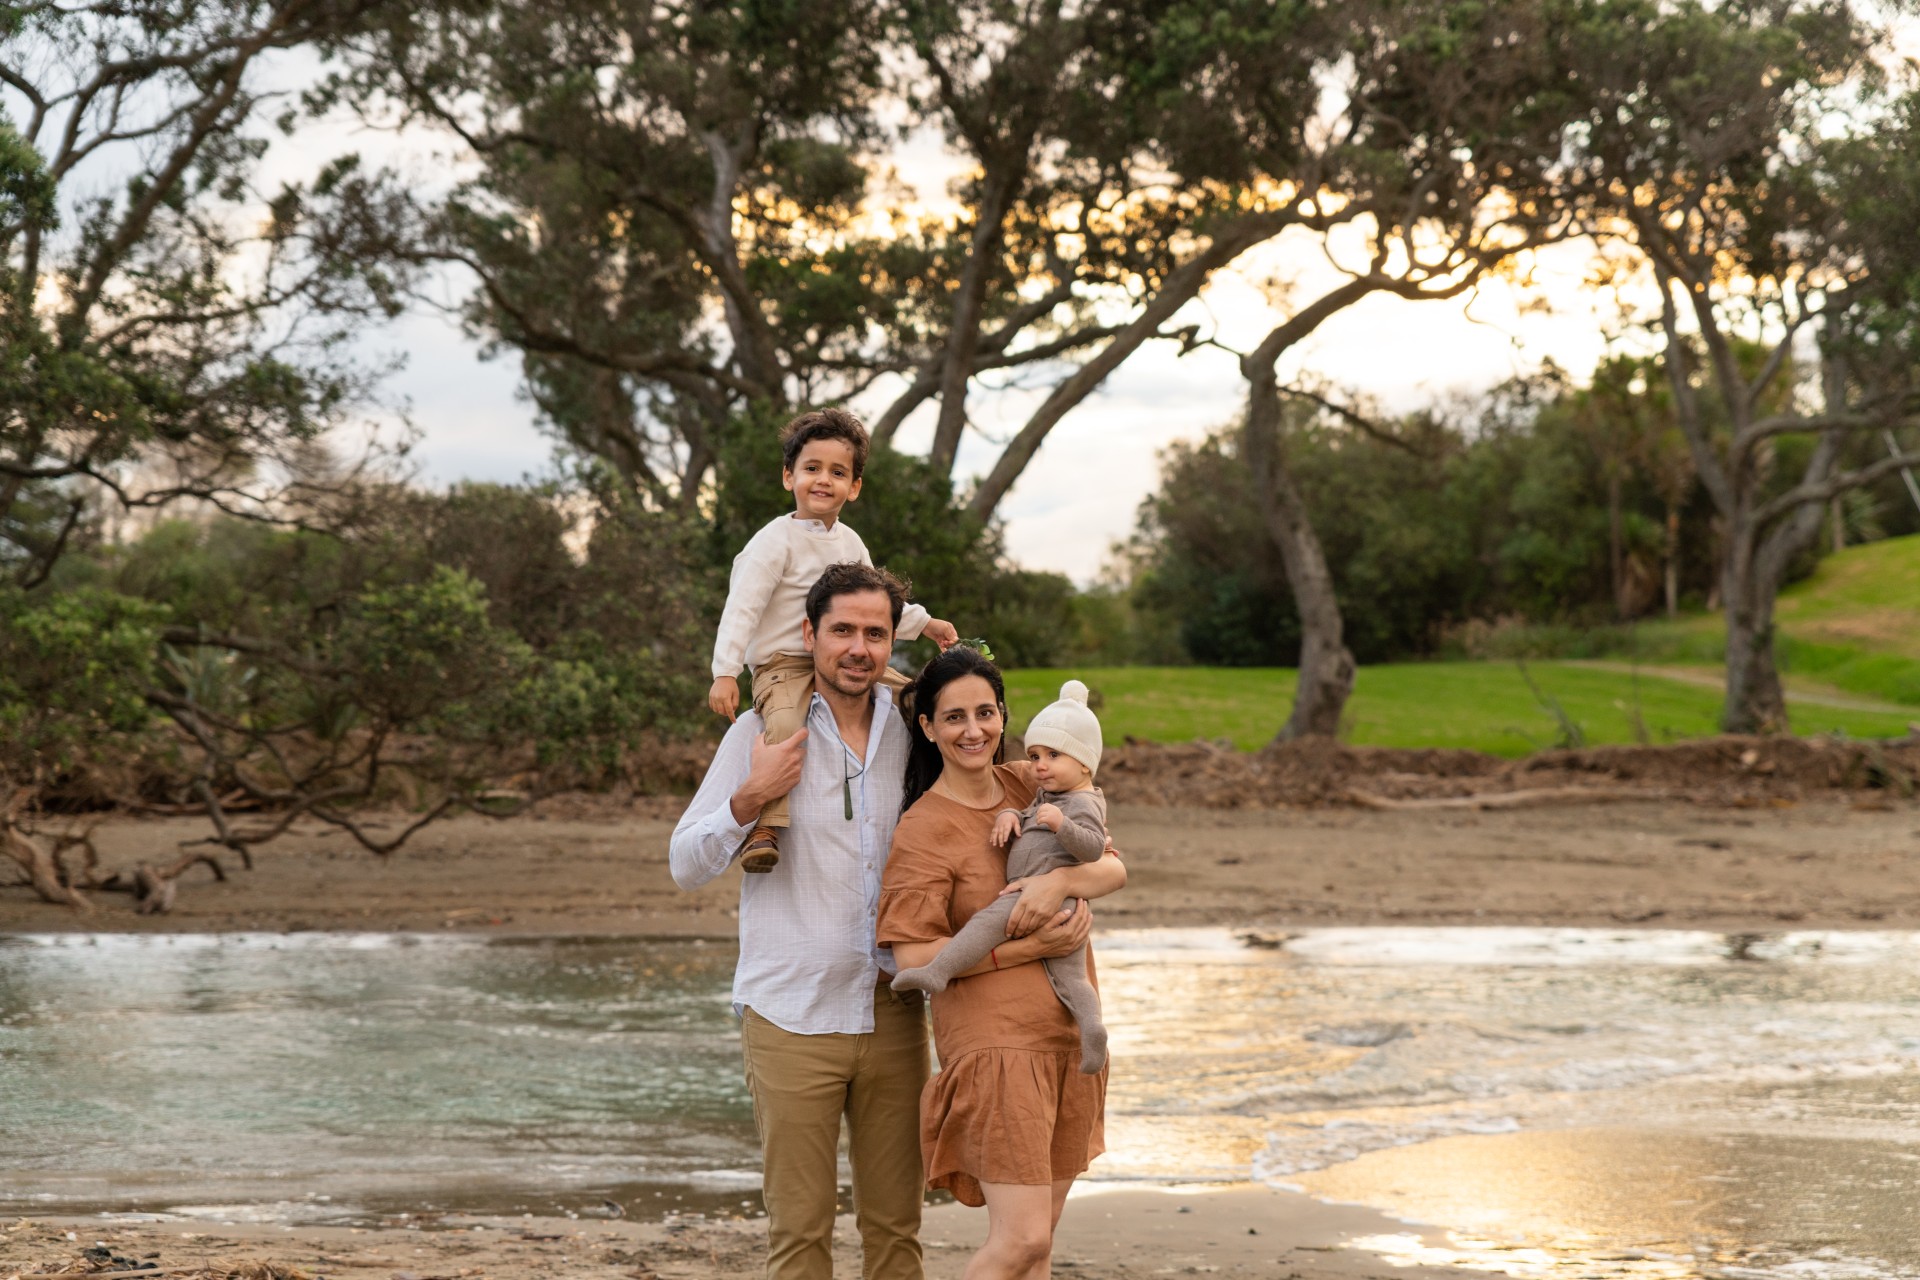 family photo on the beach, made by auckland photographer elia making memories